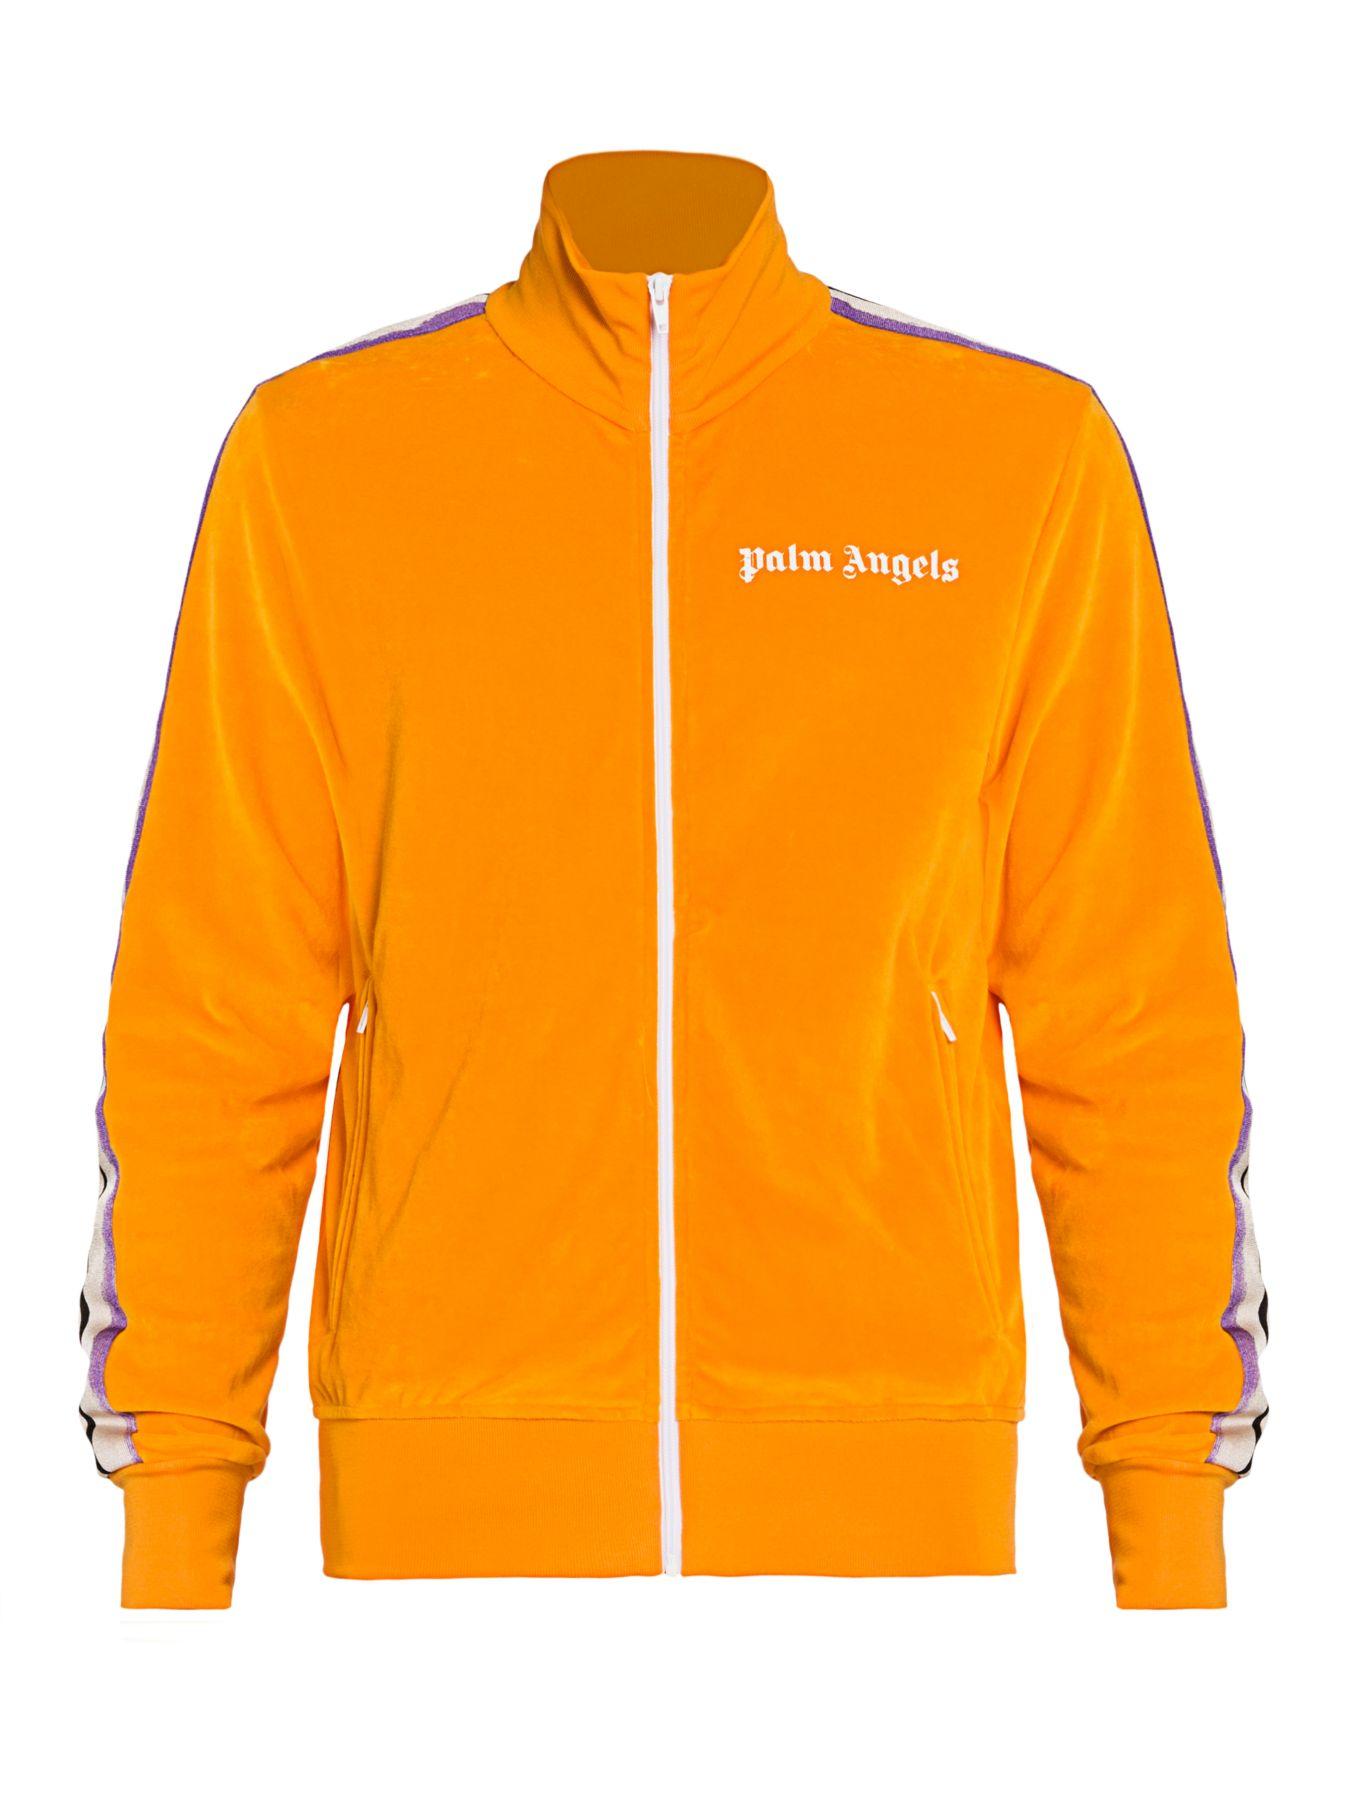 Palm Angels Classic Track Jacket in Yellow & Orange (Orange) for Men - Lyst